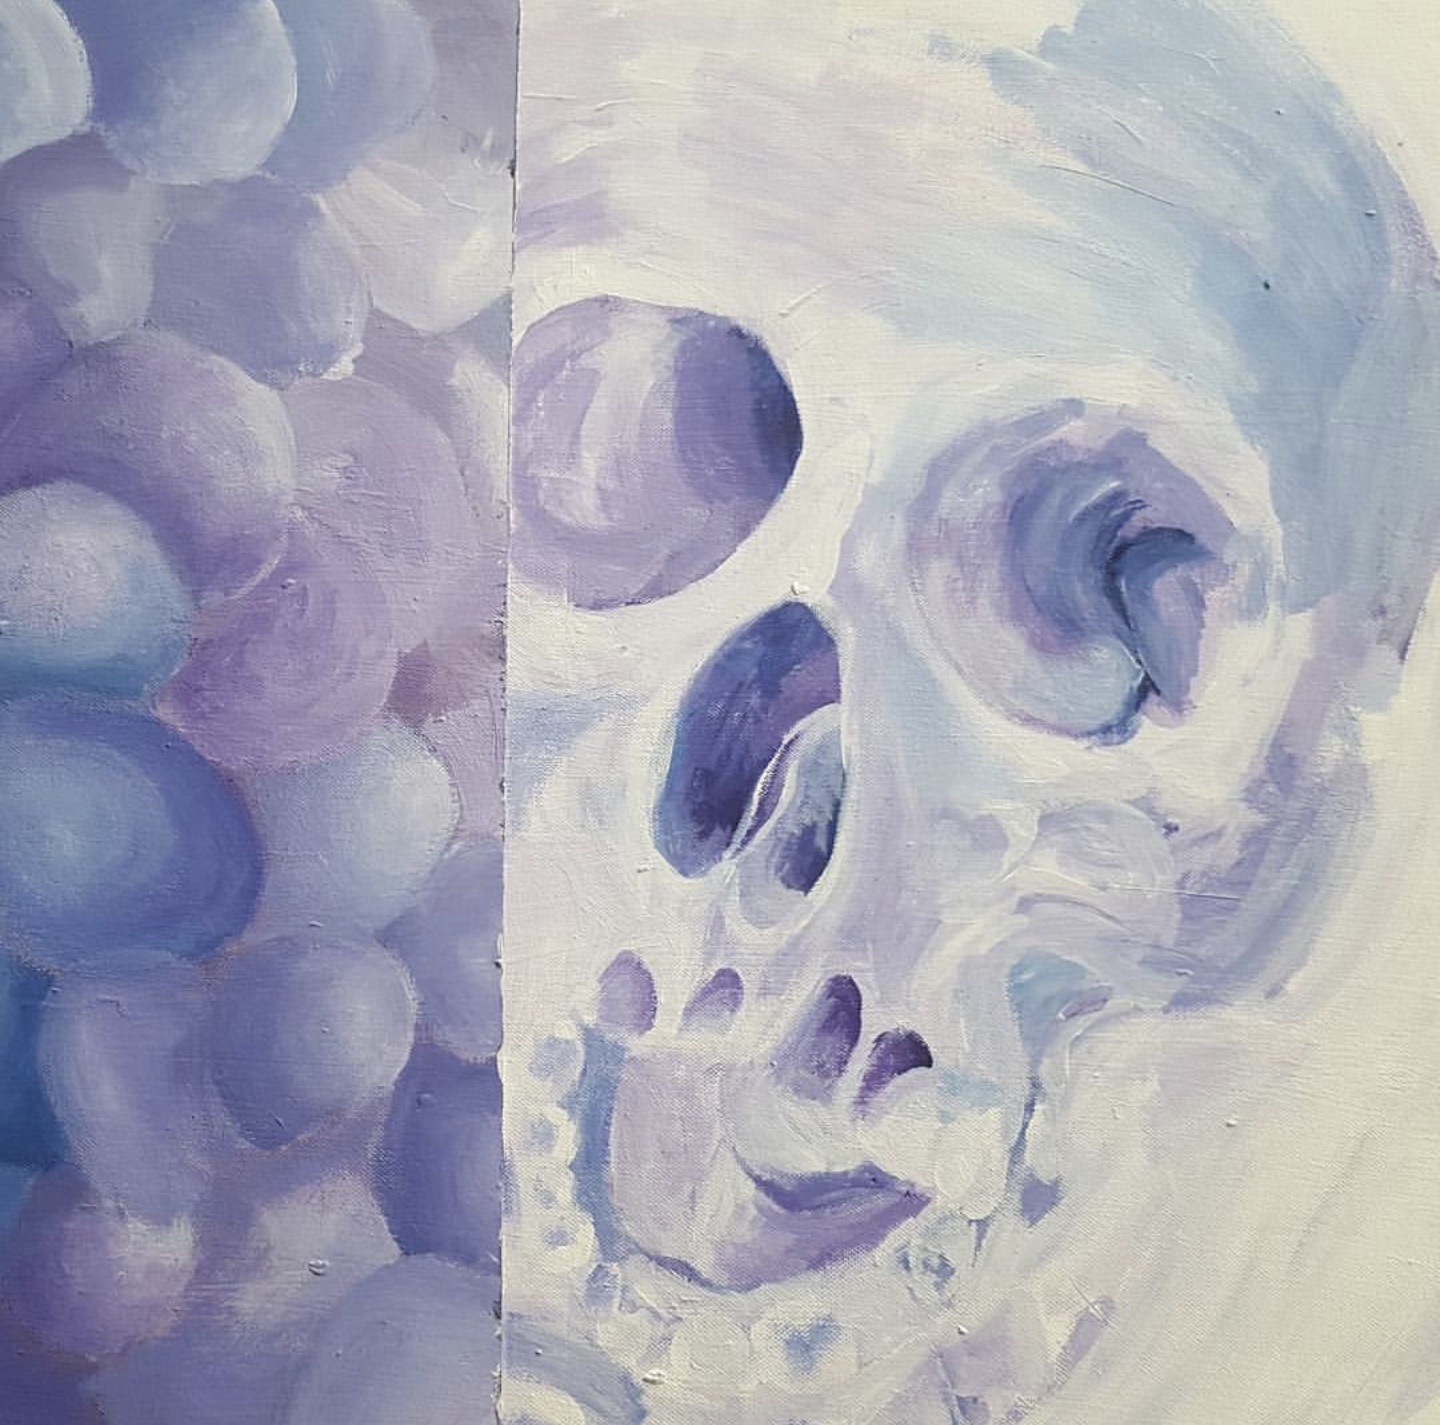 Cancer Cell Acrylic Painting. (Left) Cancer Cell, (right) Human Skull.